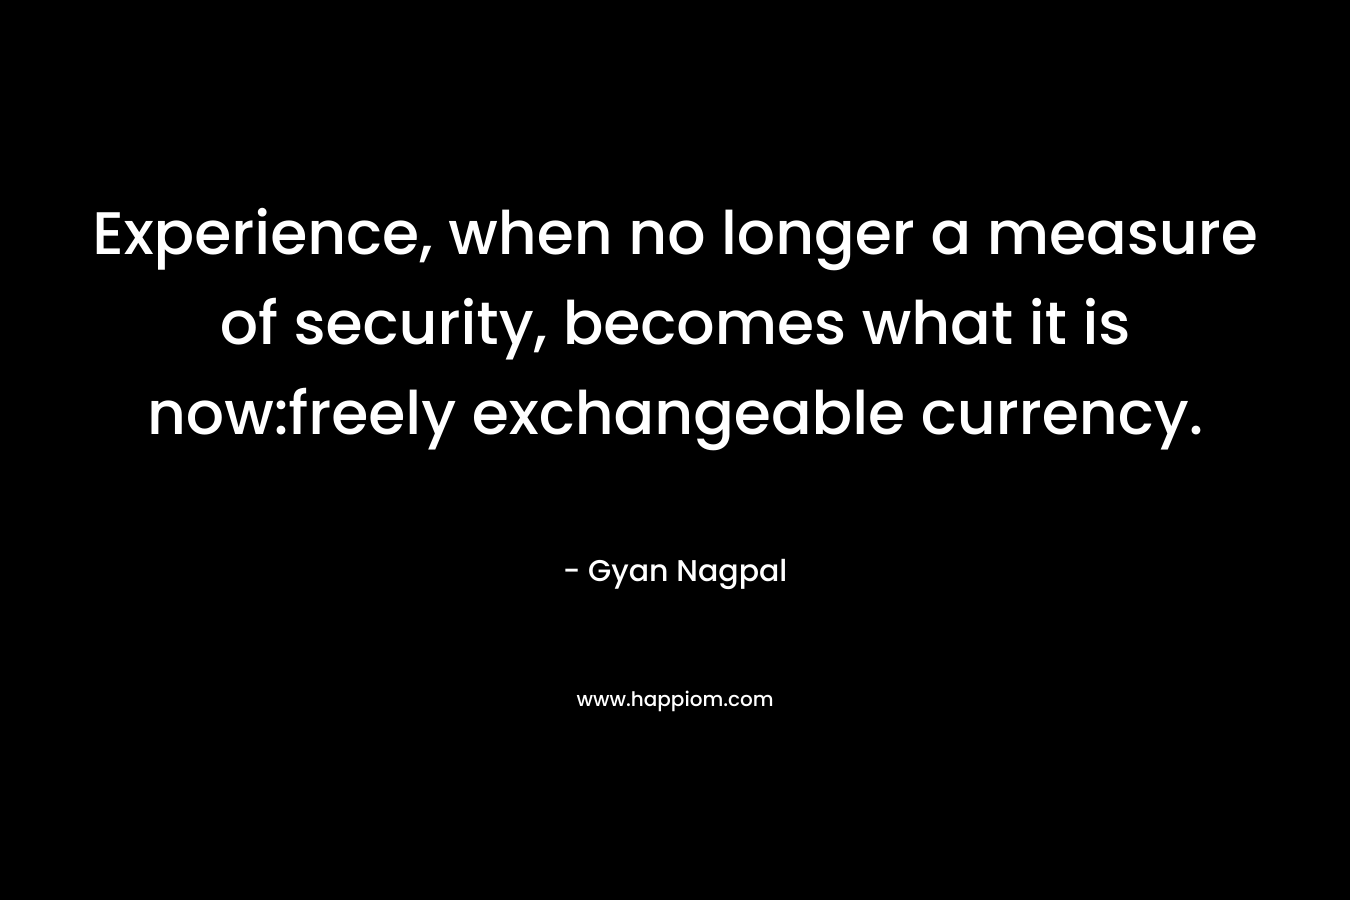 Experience, when no longer a measure of security, becomes what it is now:freely exchangeable currency.